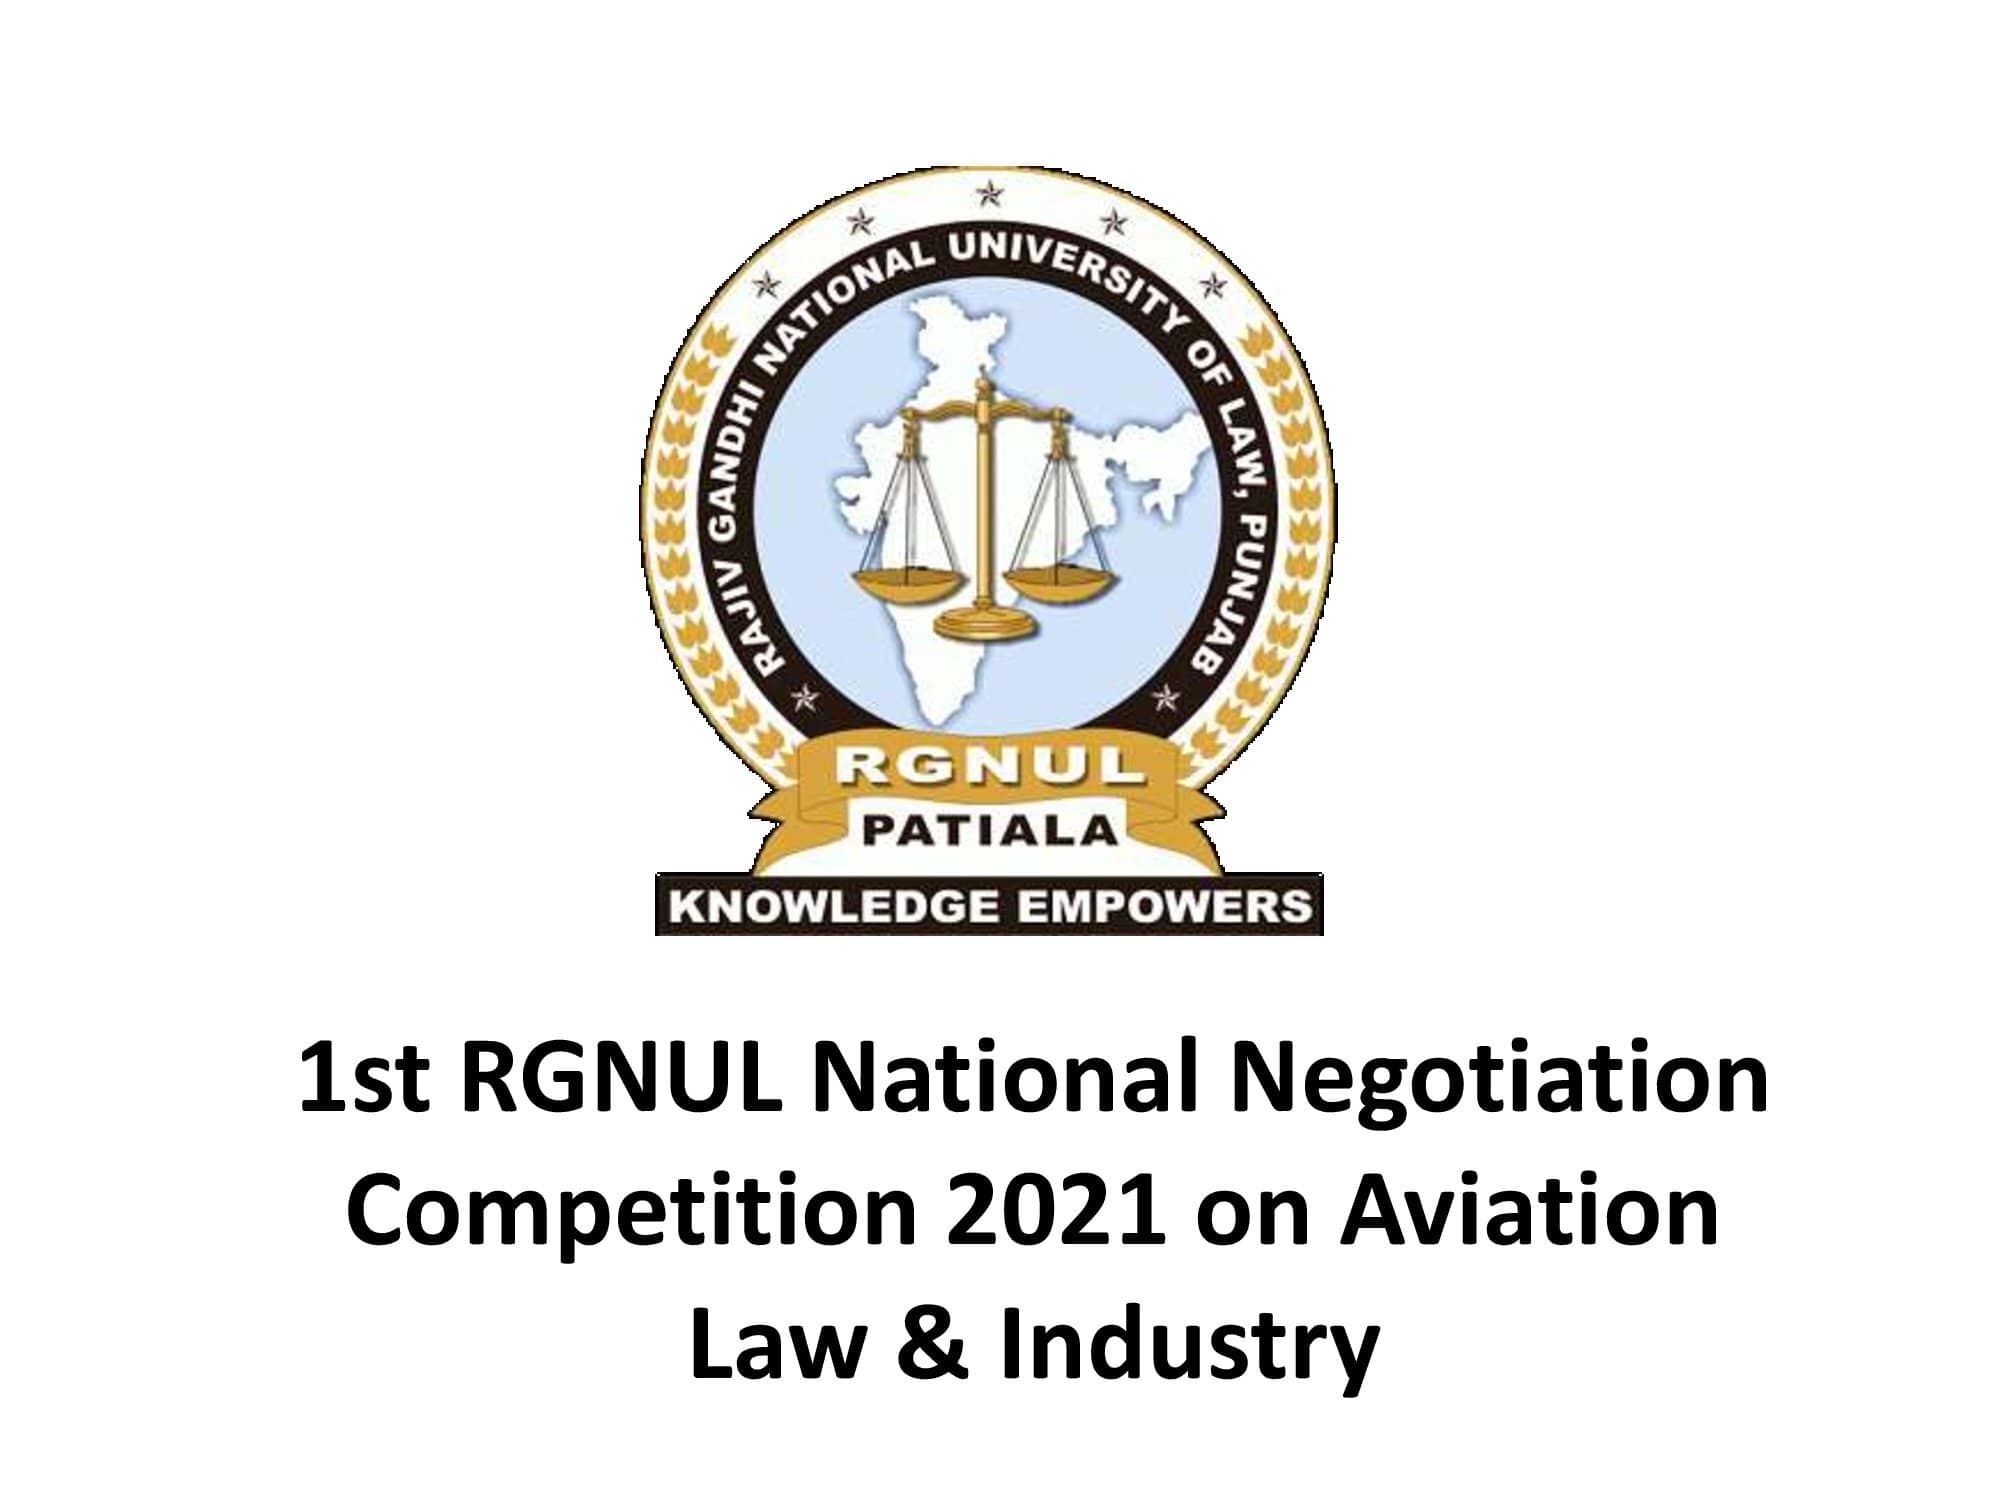 National Negotiation Competition on Aviation Law & Industry